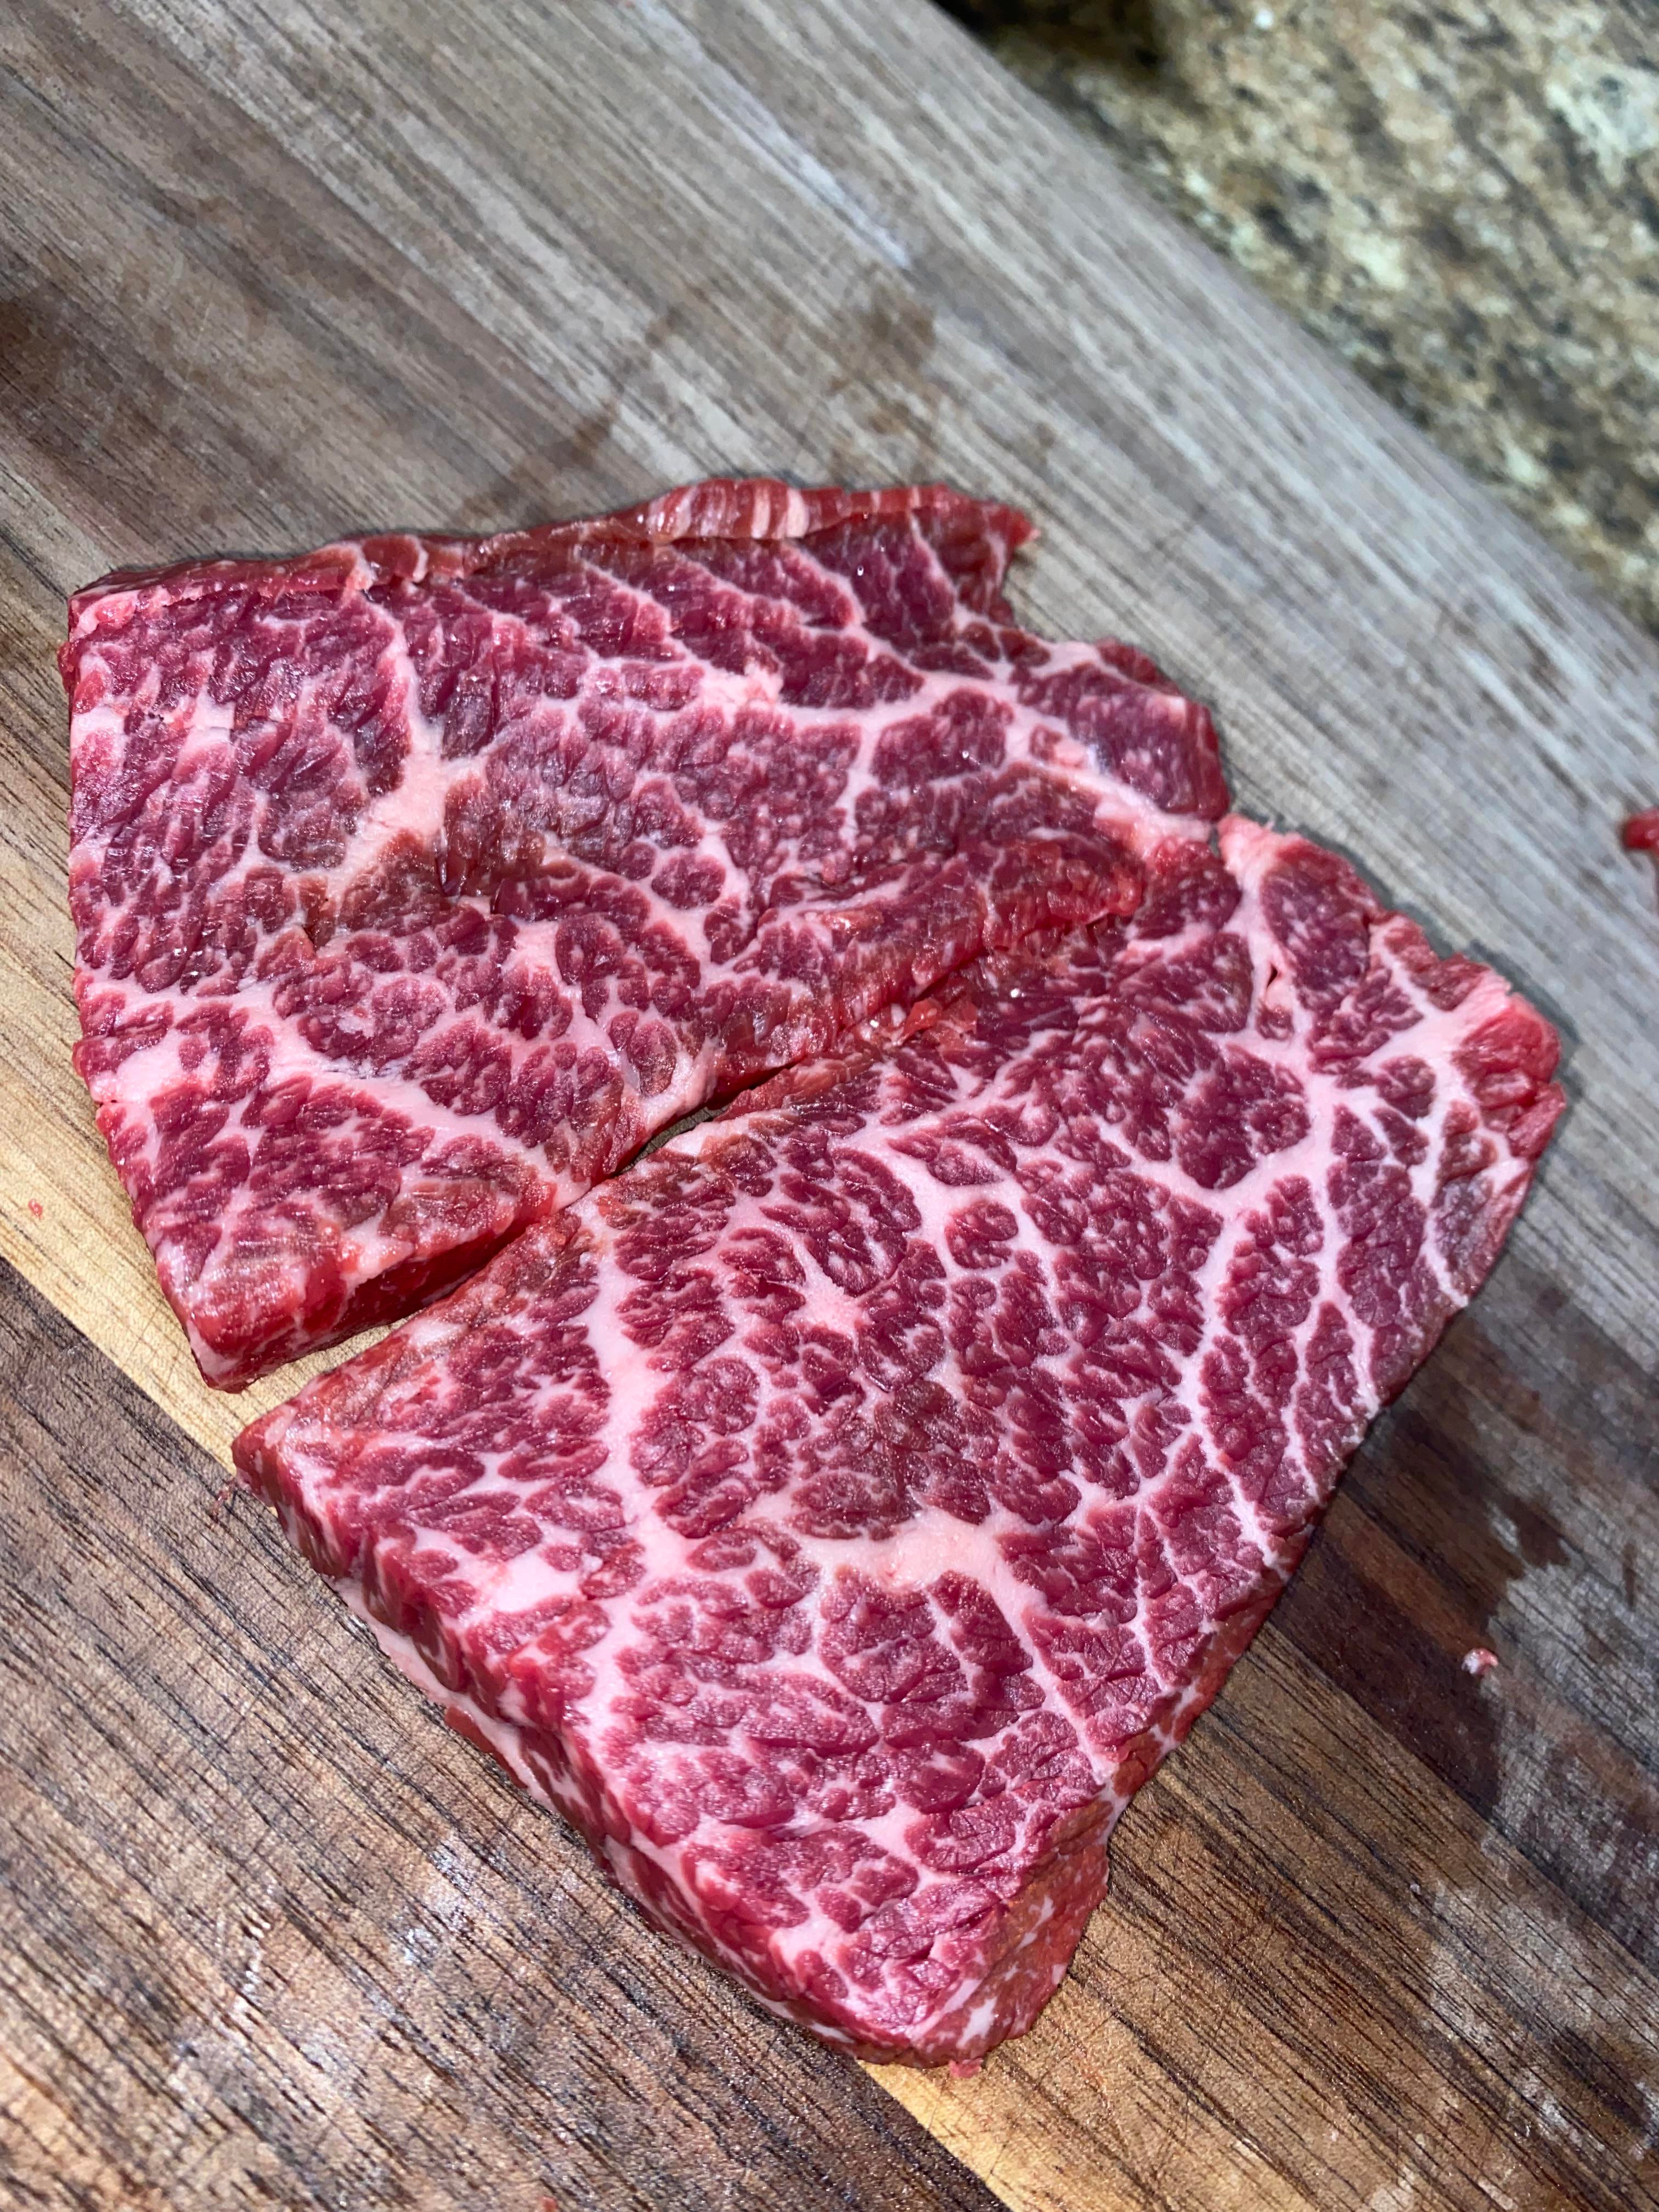 Marbling On American Wagyu Steak Denver Cut Dining And Cooking